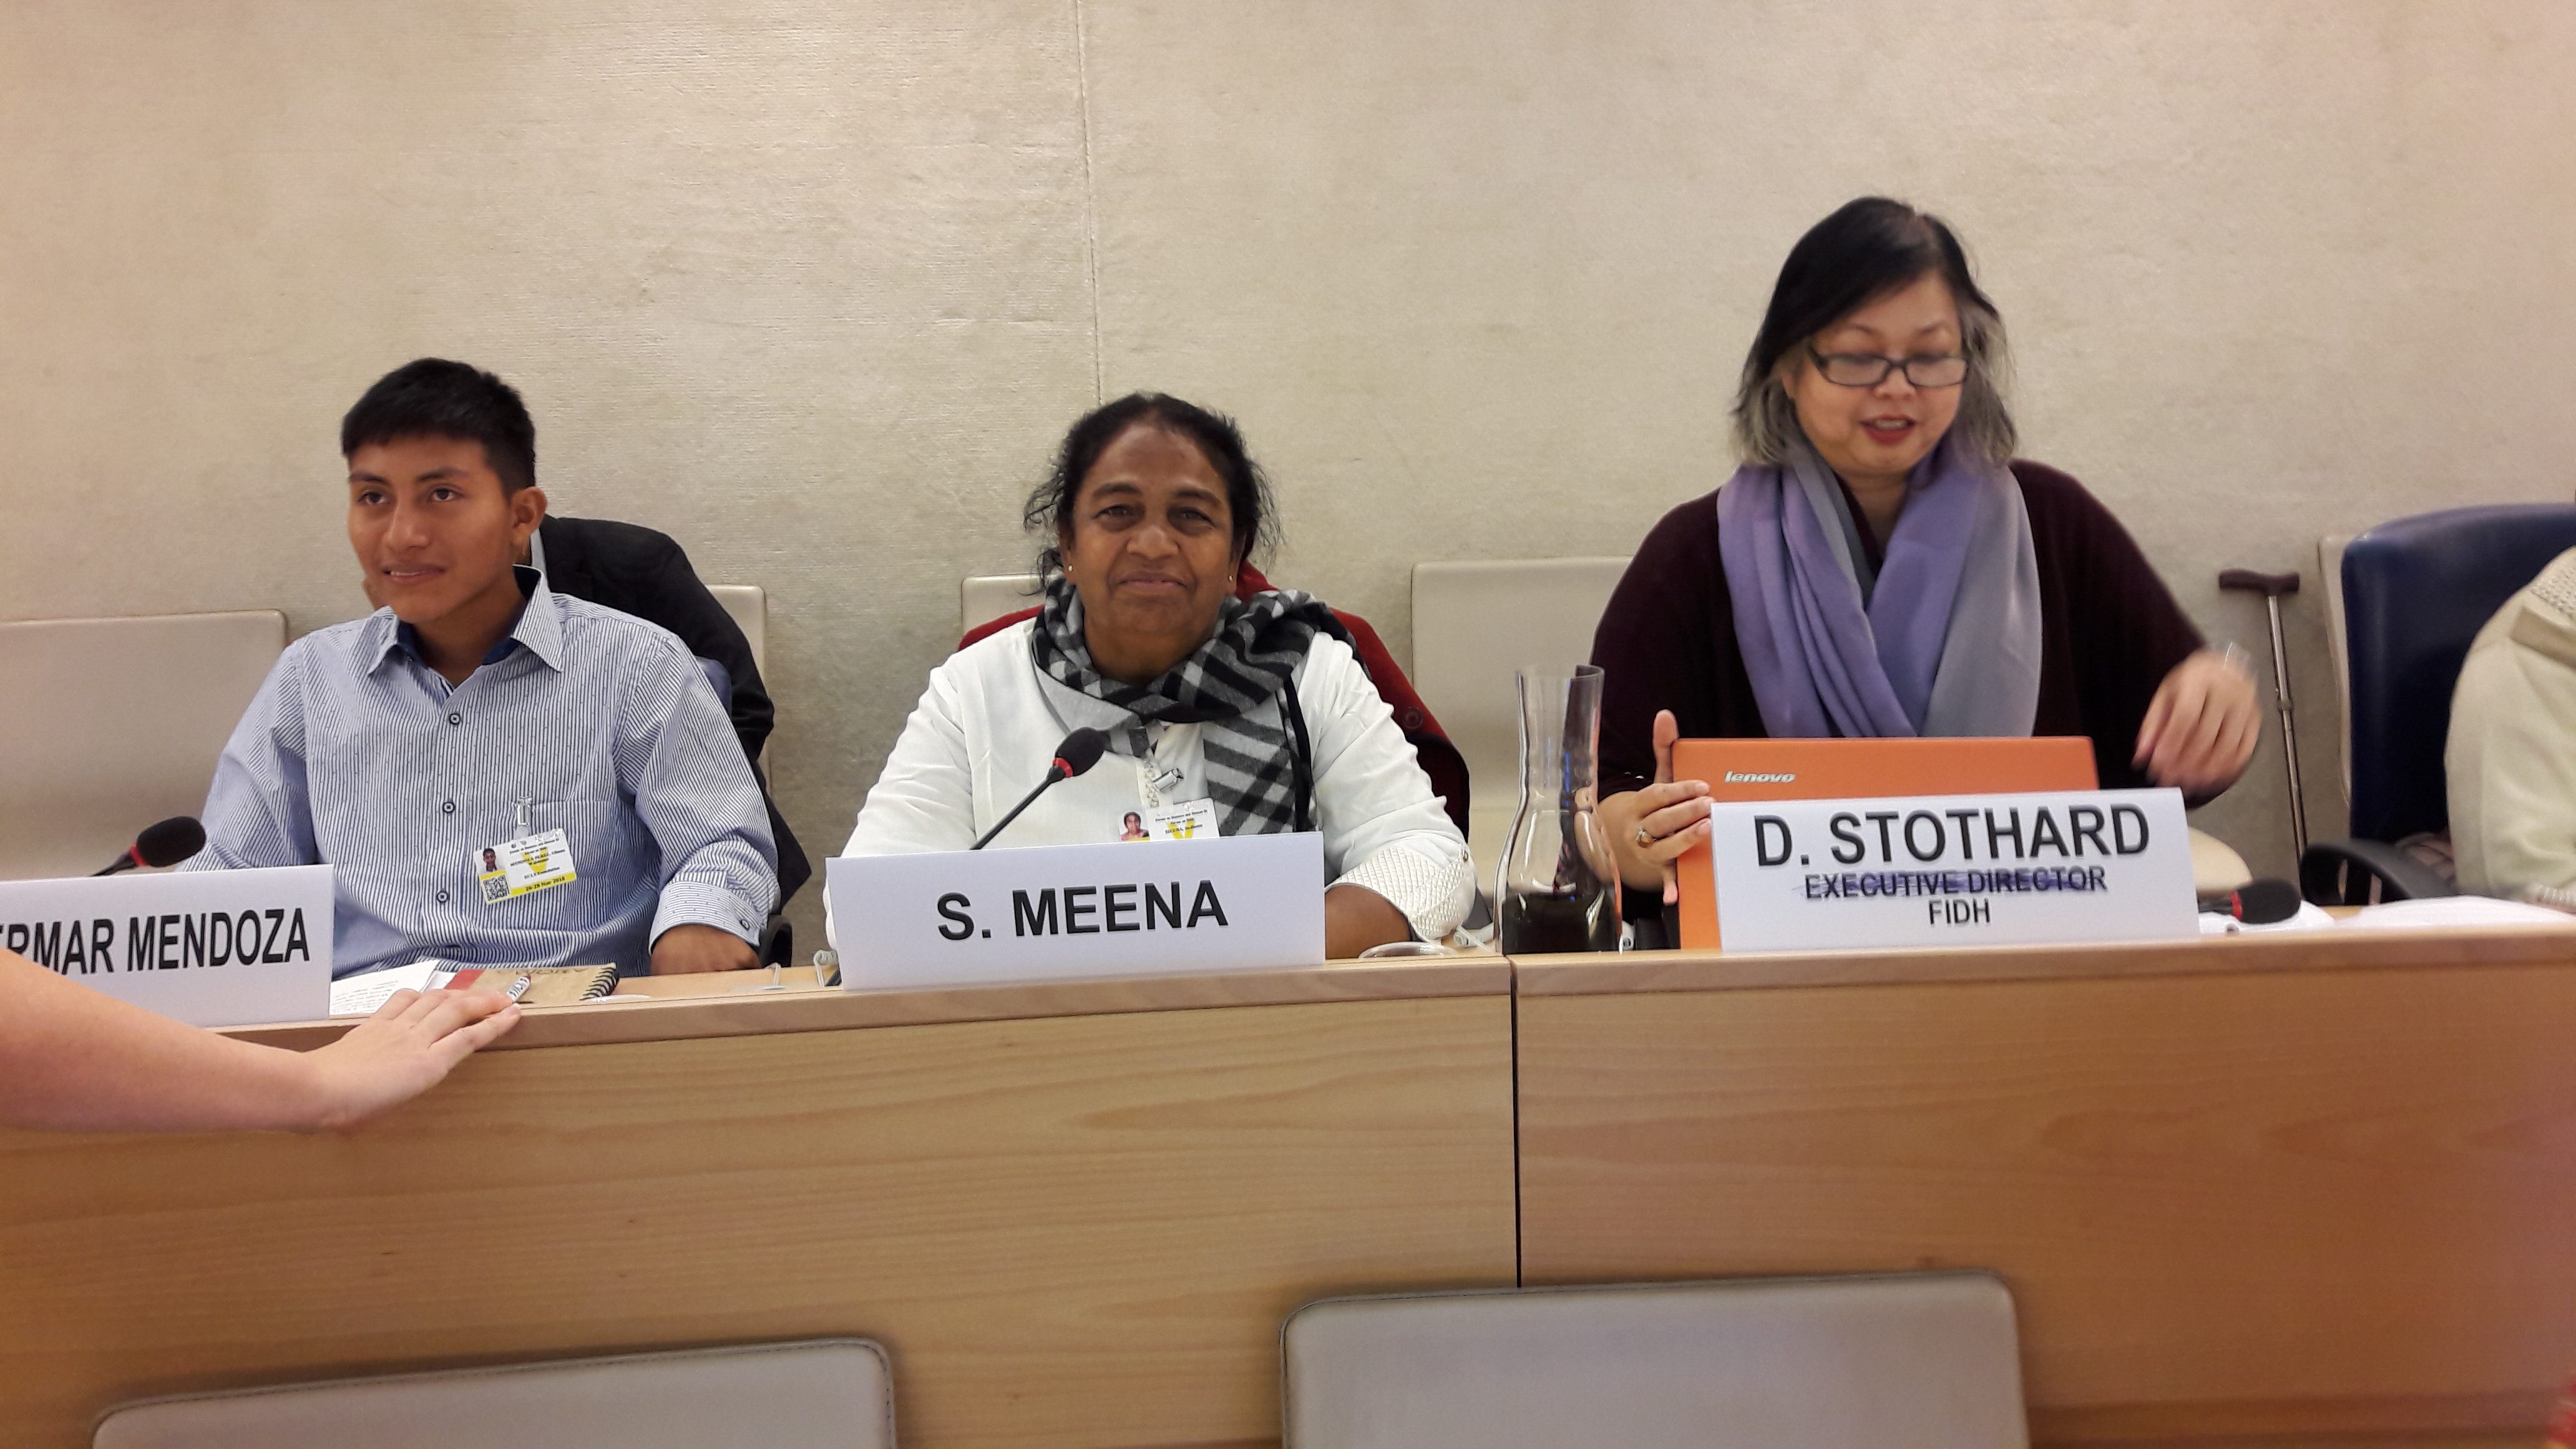 Mrs Sadhana Meena, woman community leader at opening session of Forum for Business and Human Right, November 2019 Geneva